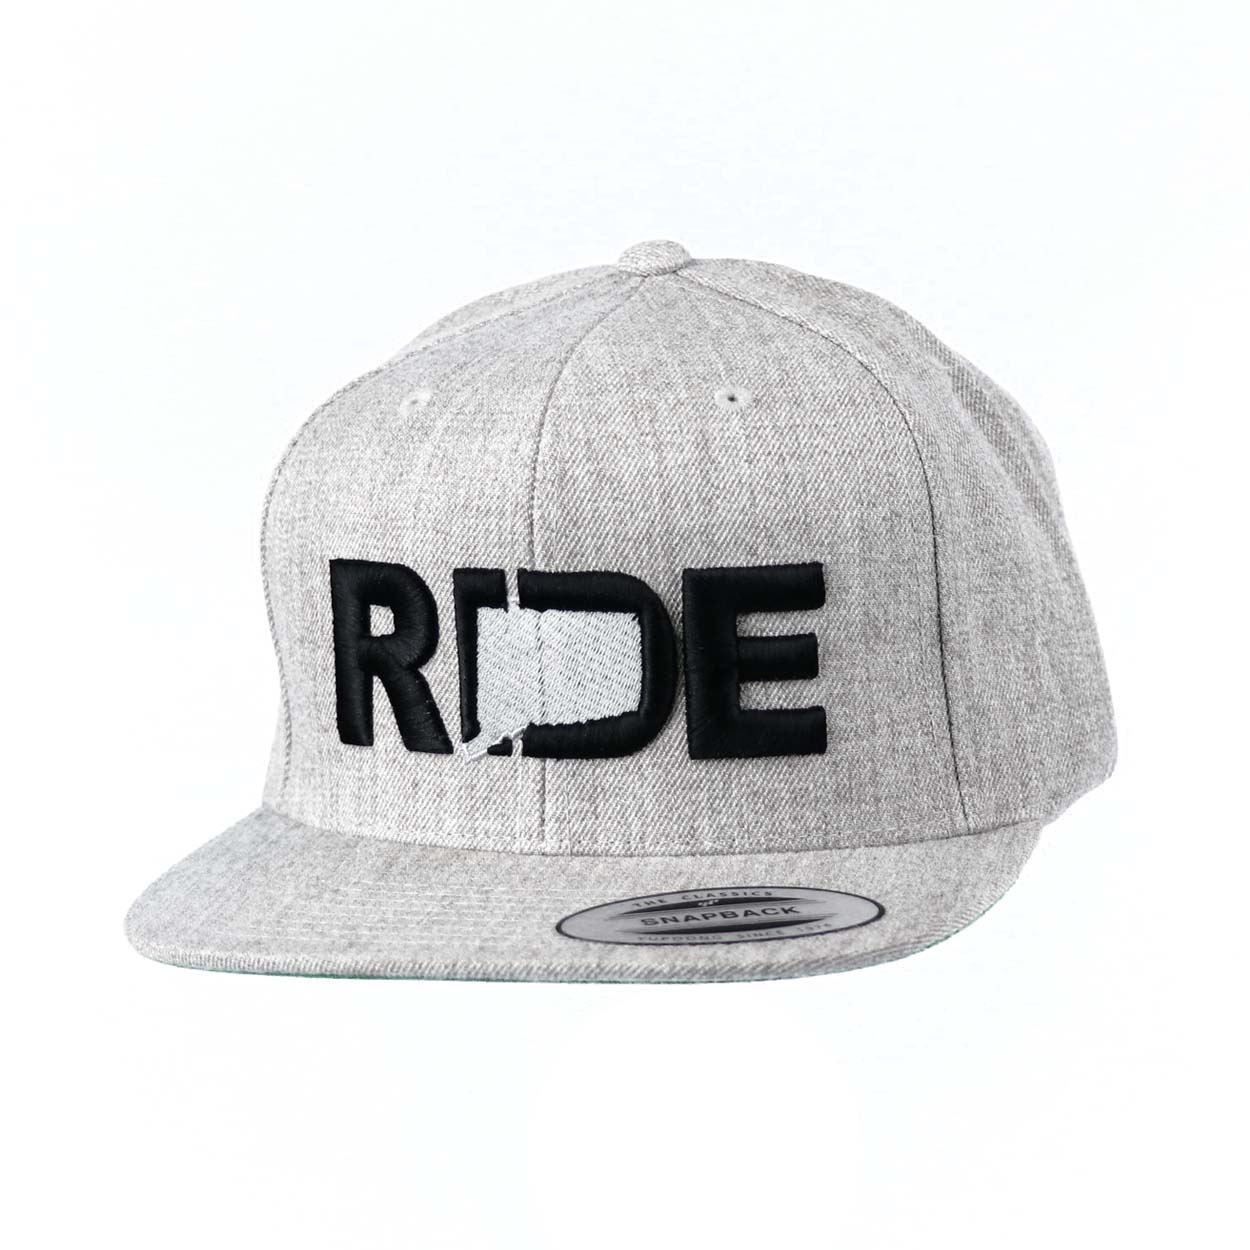 Ride Connecticut Classic Pro 3D Puff Embroidered Snapback Flat Brim Hat Heather Gray